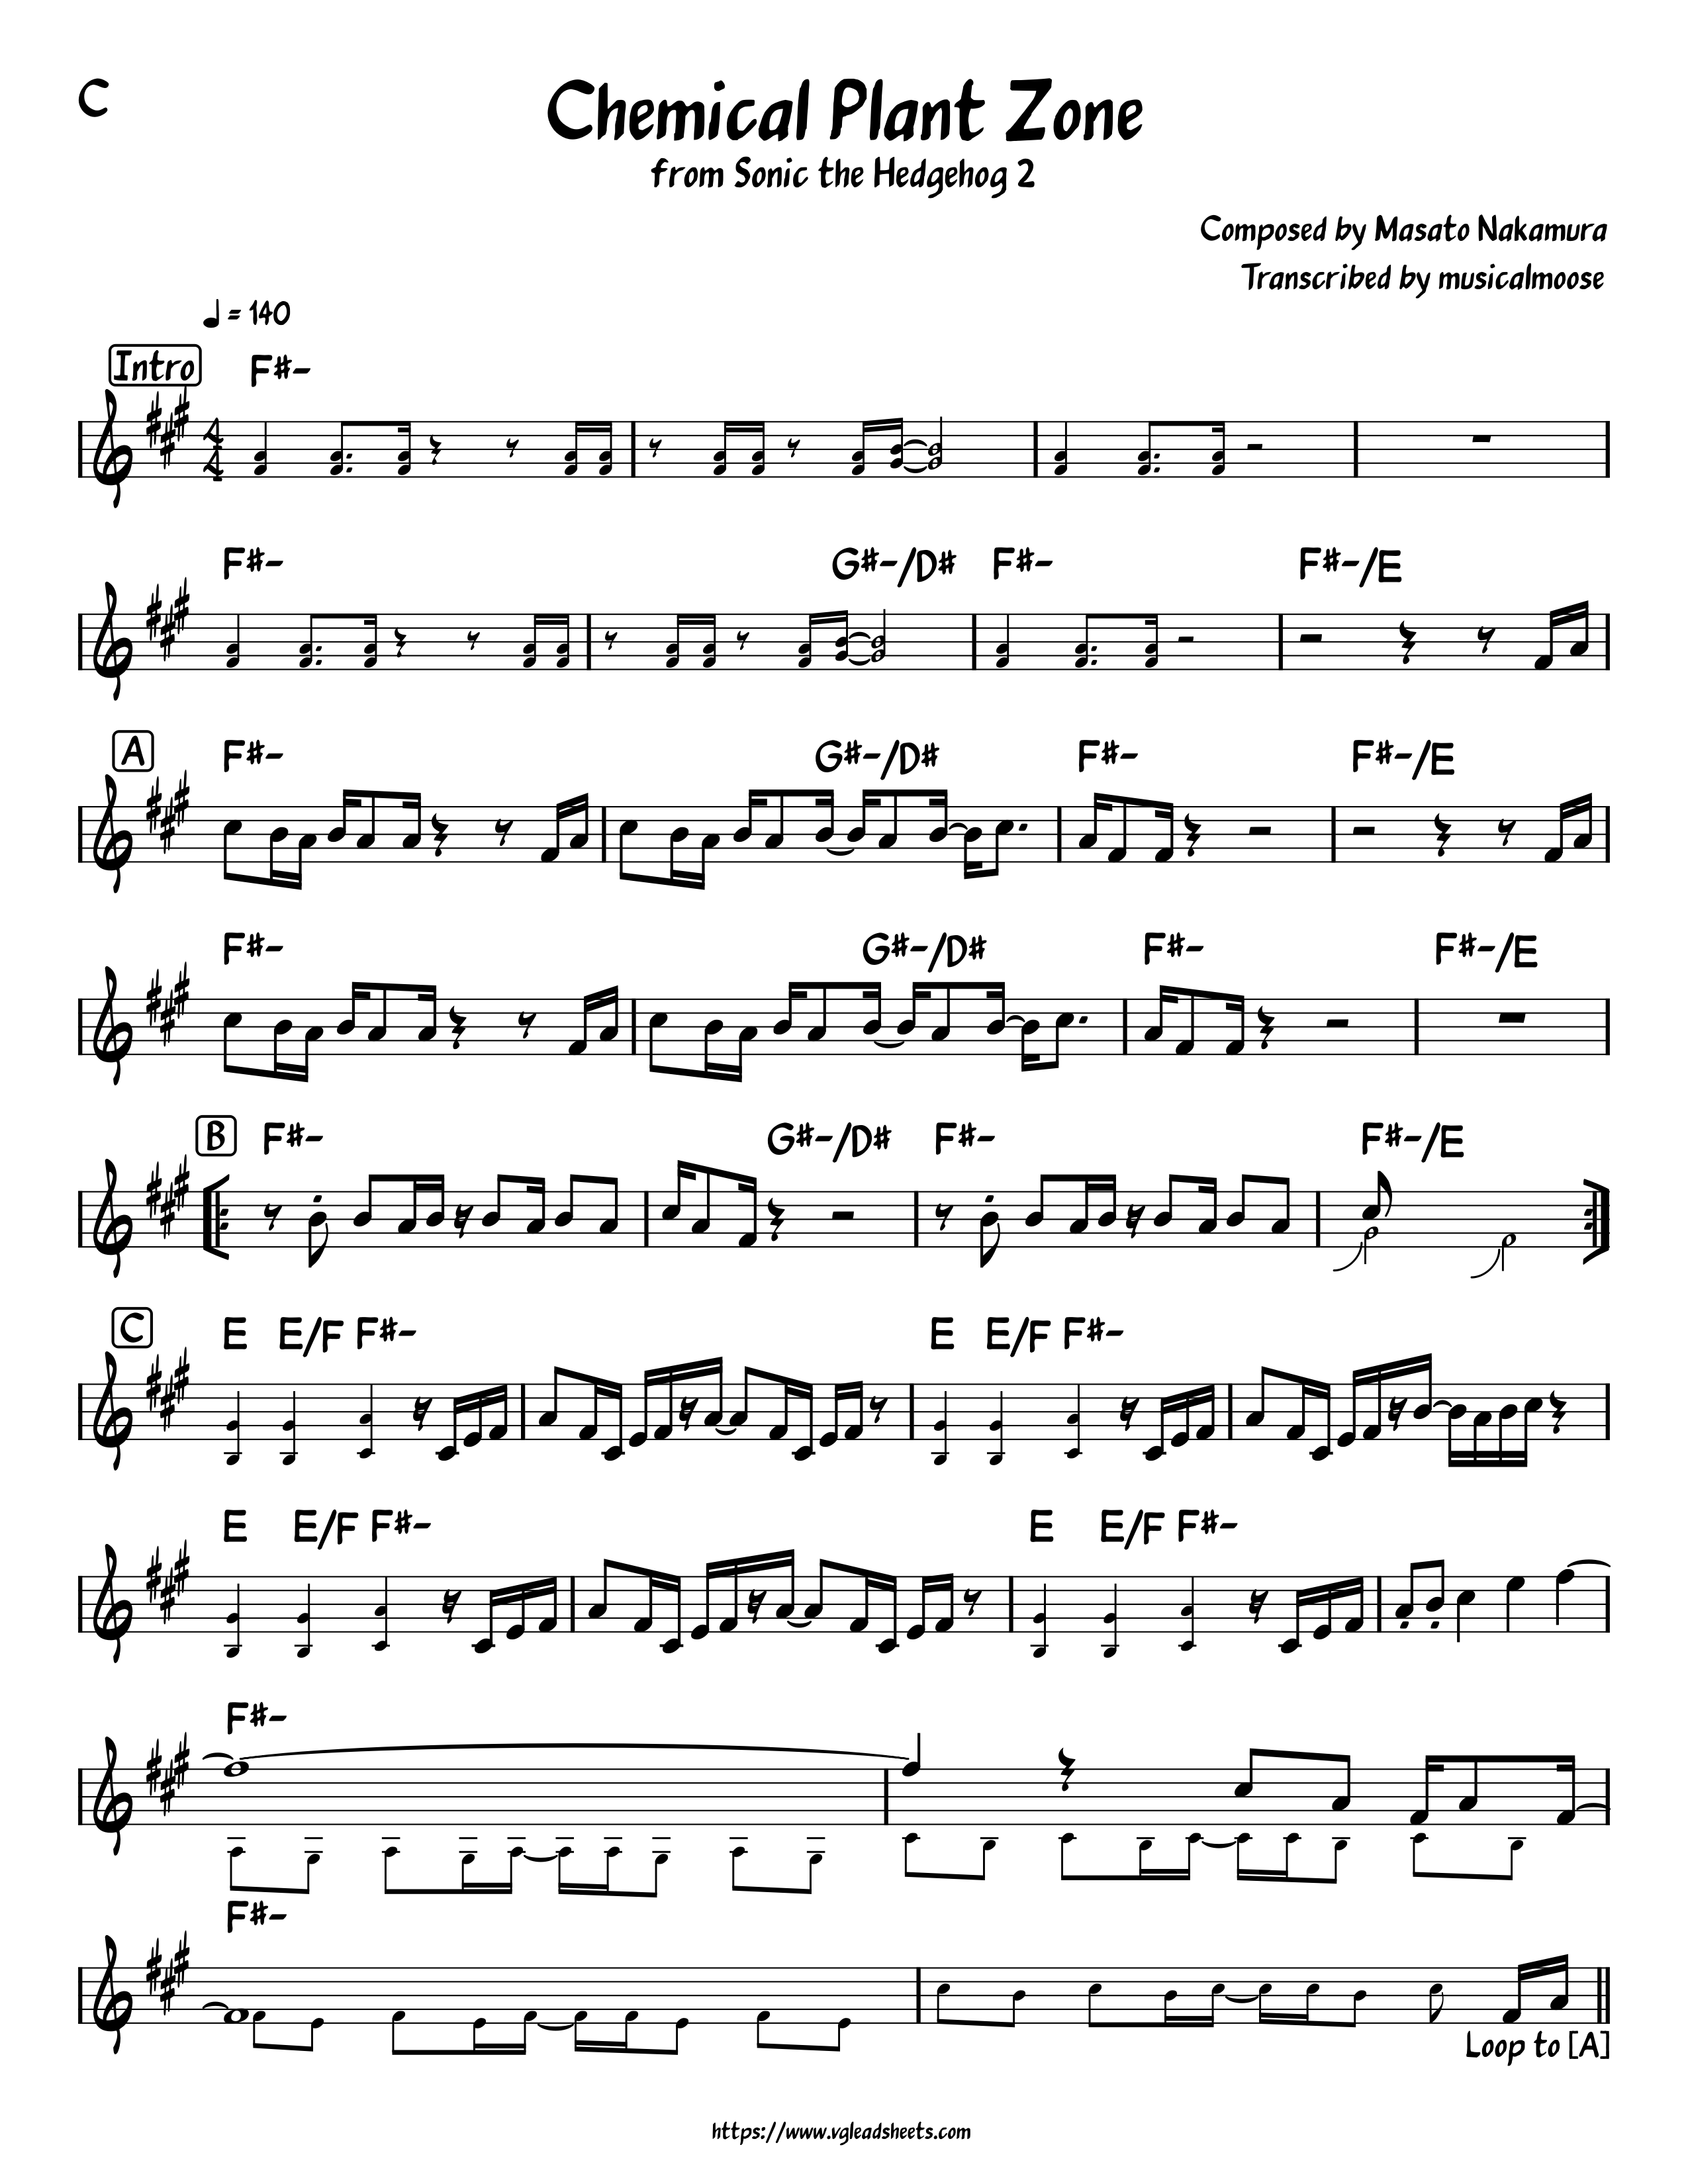 Green Hill Zone Sheet music for Piano (Solo)